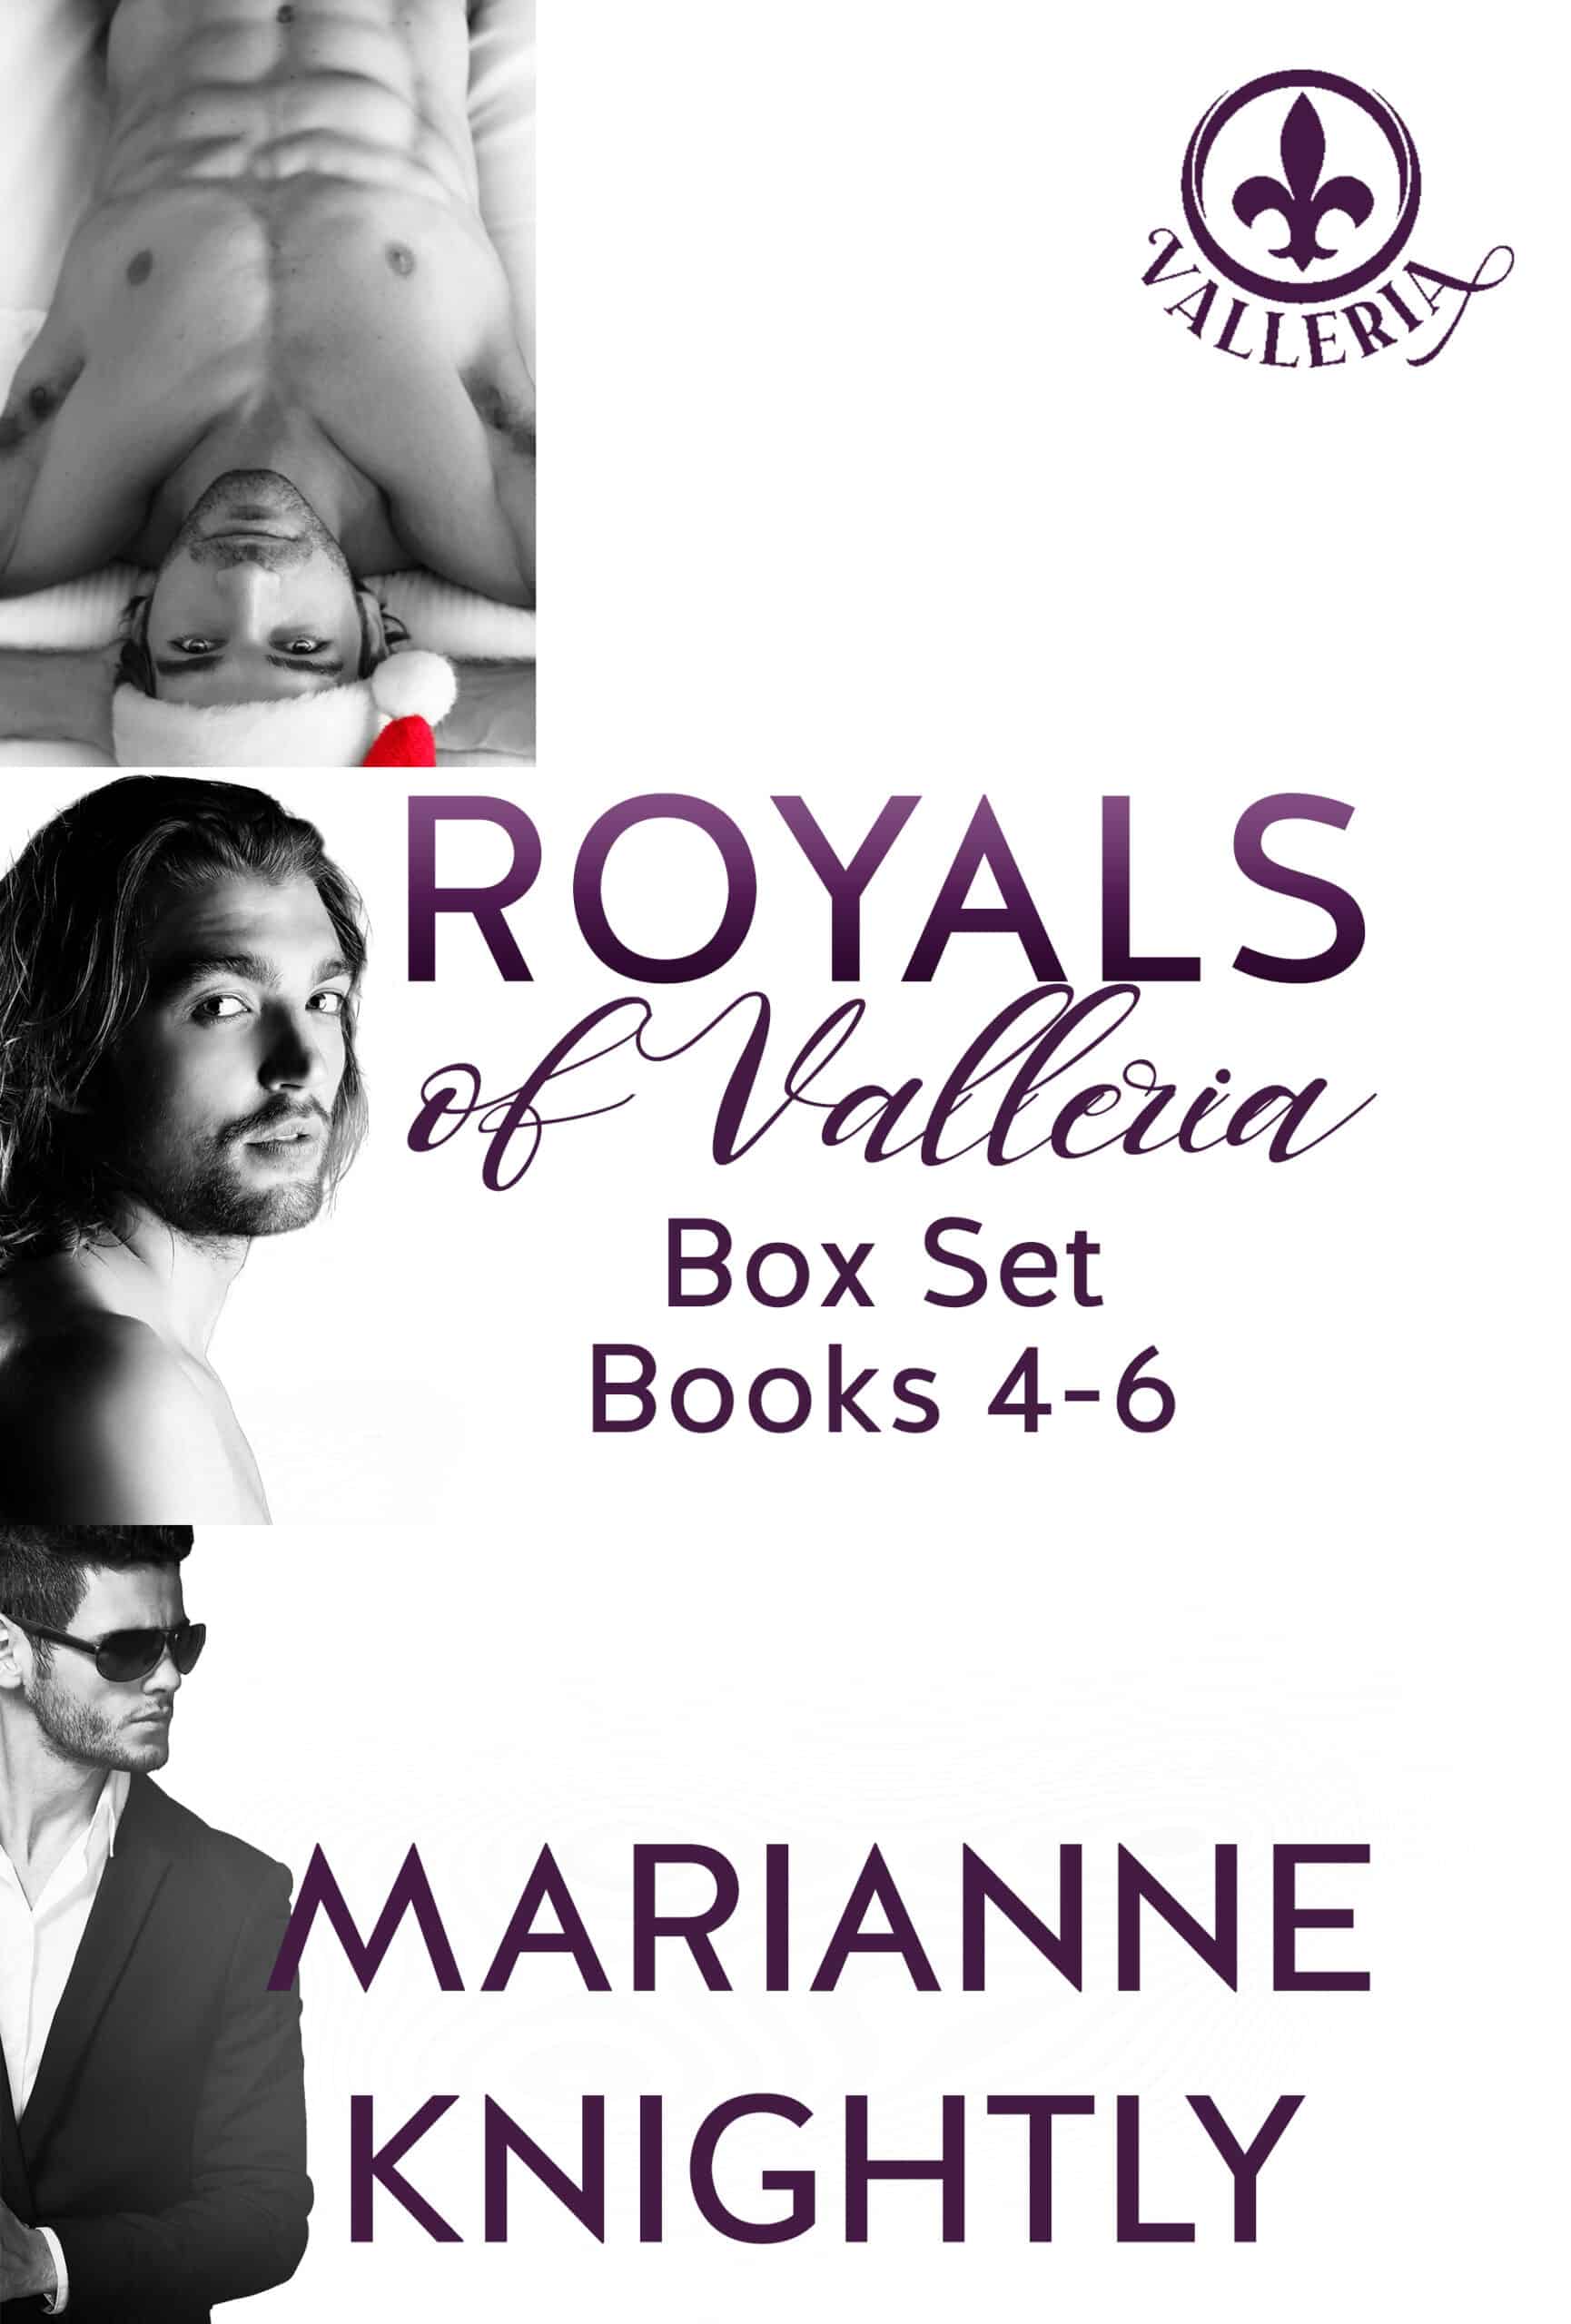 Royals of Valleria Box Set (Books 4-6) by Marianne Knightly